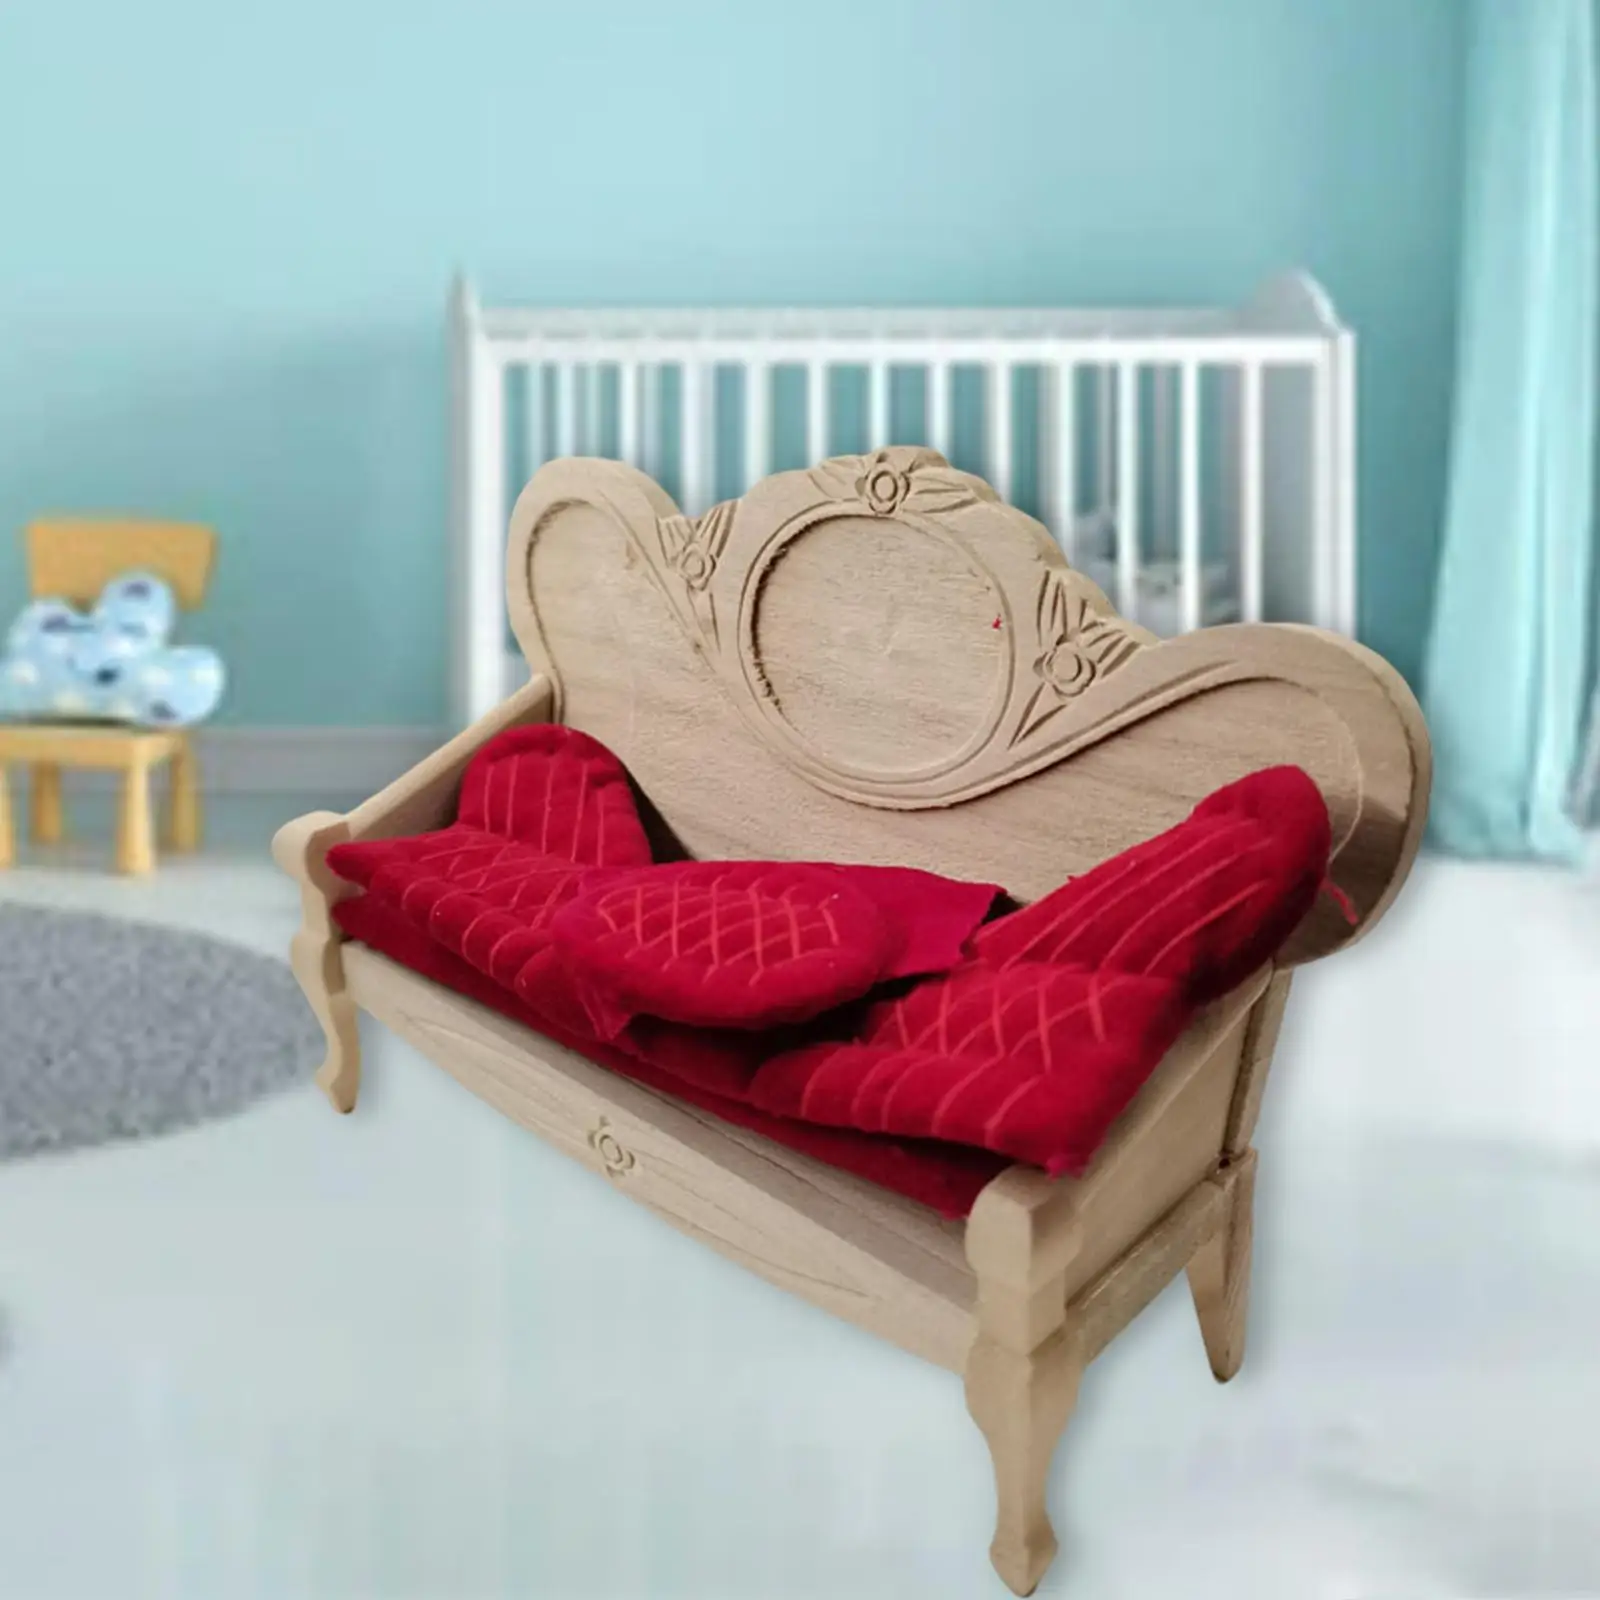 Mini Dollhouse Sofa Toy Accessory Furniture Model DIY 1/12 Scale Armchair Couch for Living Room Bedroom Landscape Home Decor